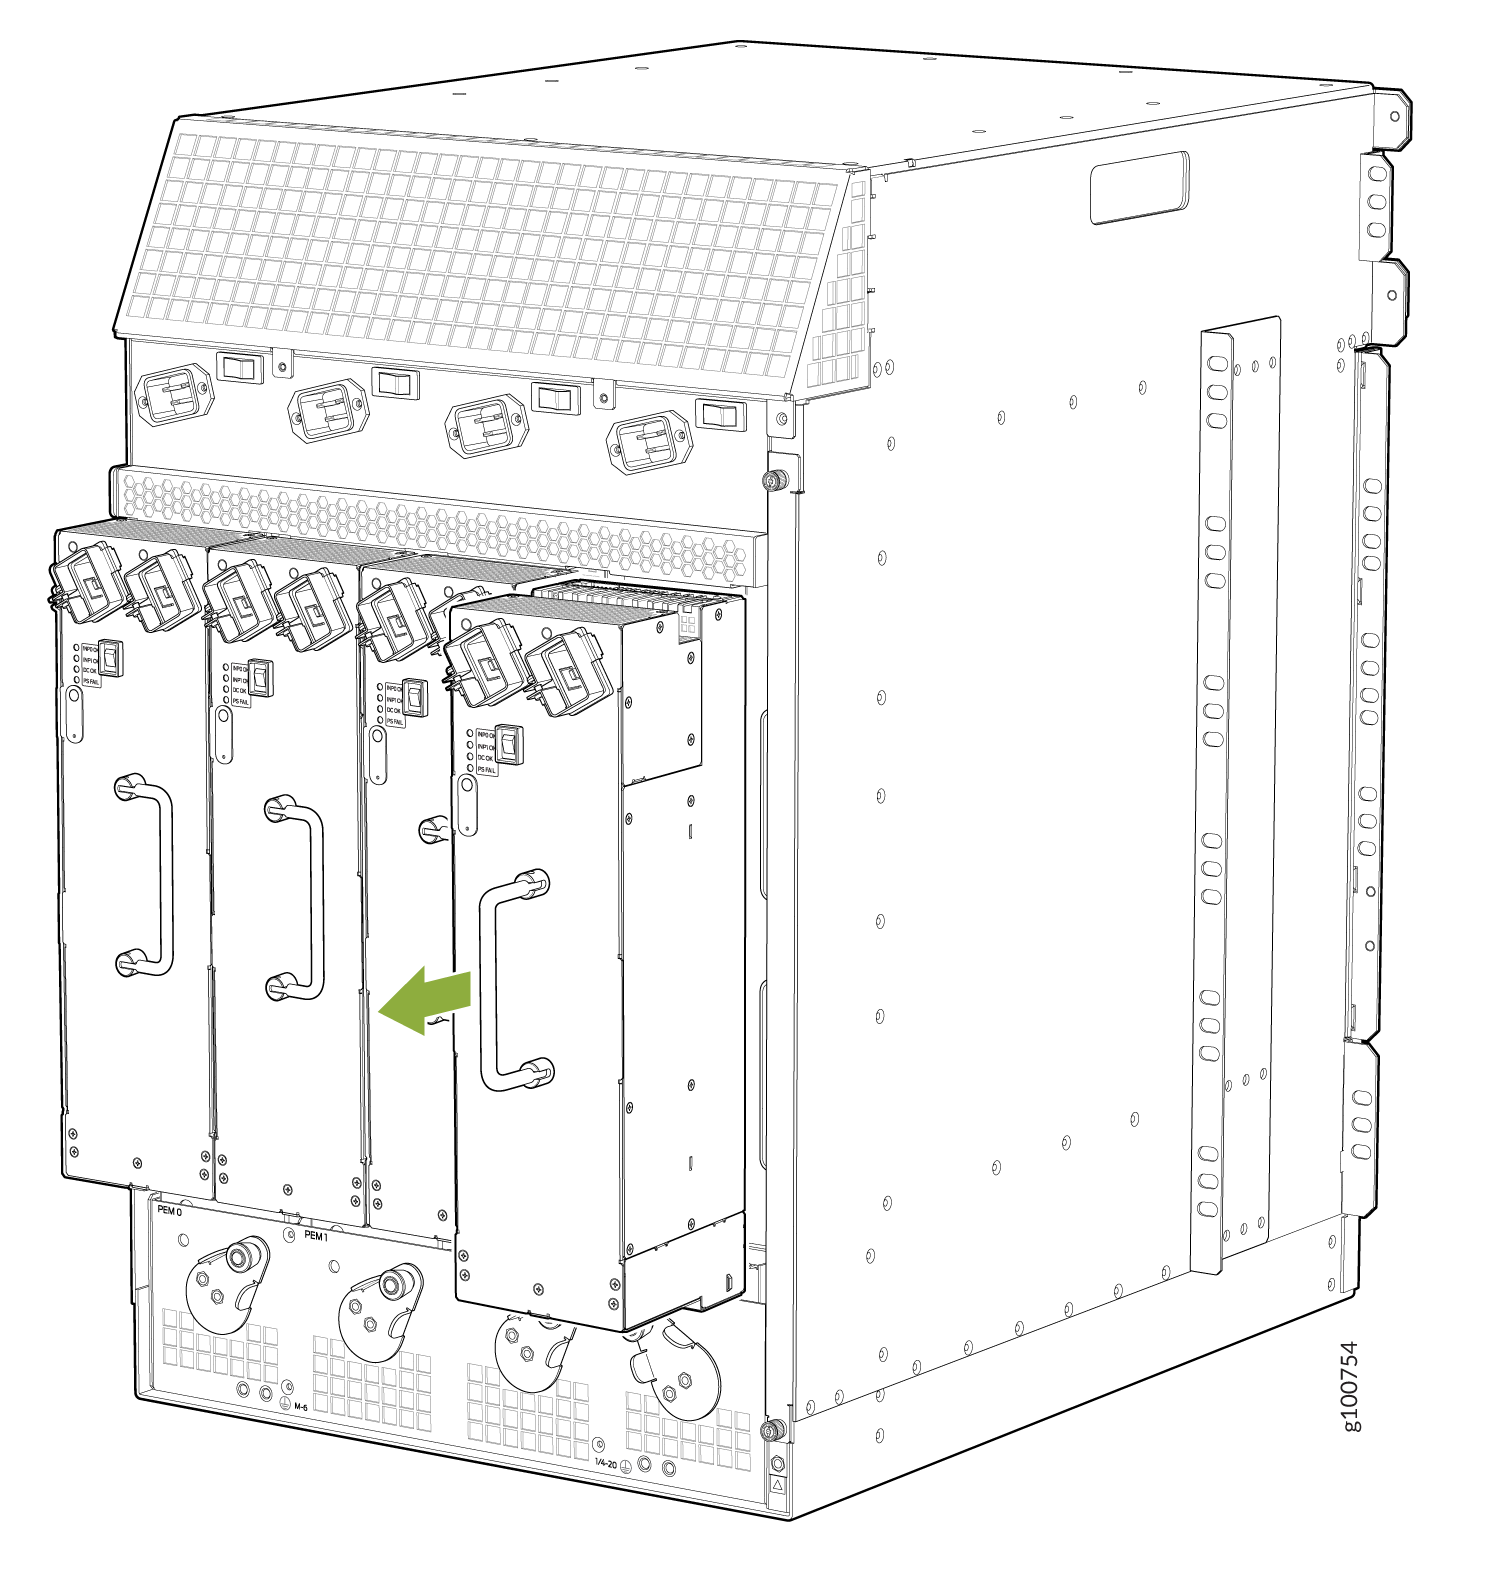 Removing a High-Capacity Second-Generation AC Power Supply